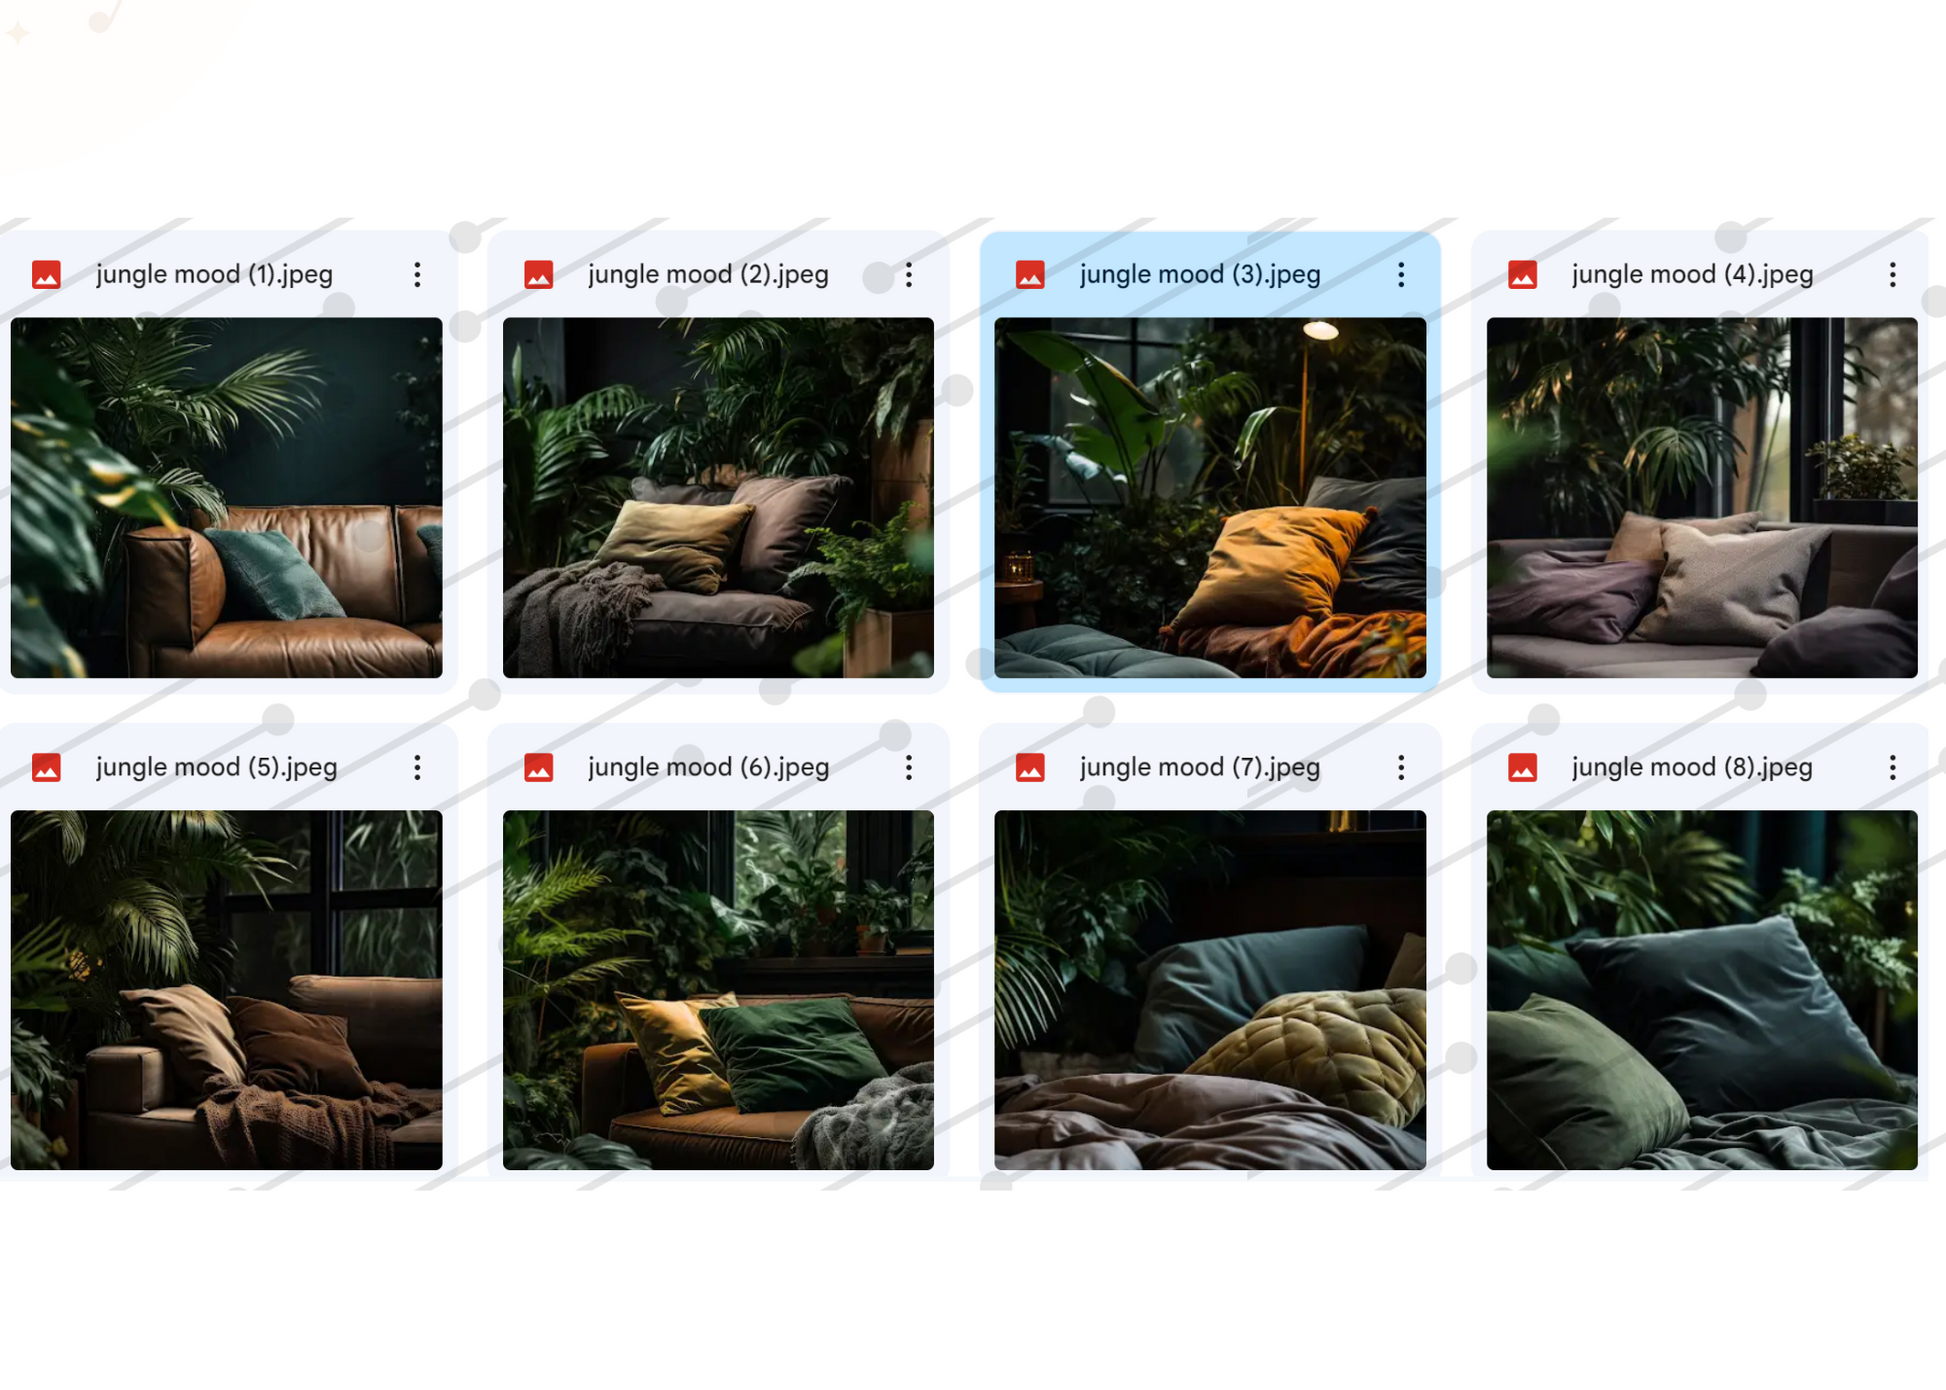 Lifestyle Stock Photos Bundle - 19 Photos- Jungle Mood- Lush Green and Moody Stock Photo Collection PLR license ( Your Use Only 